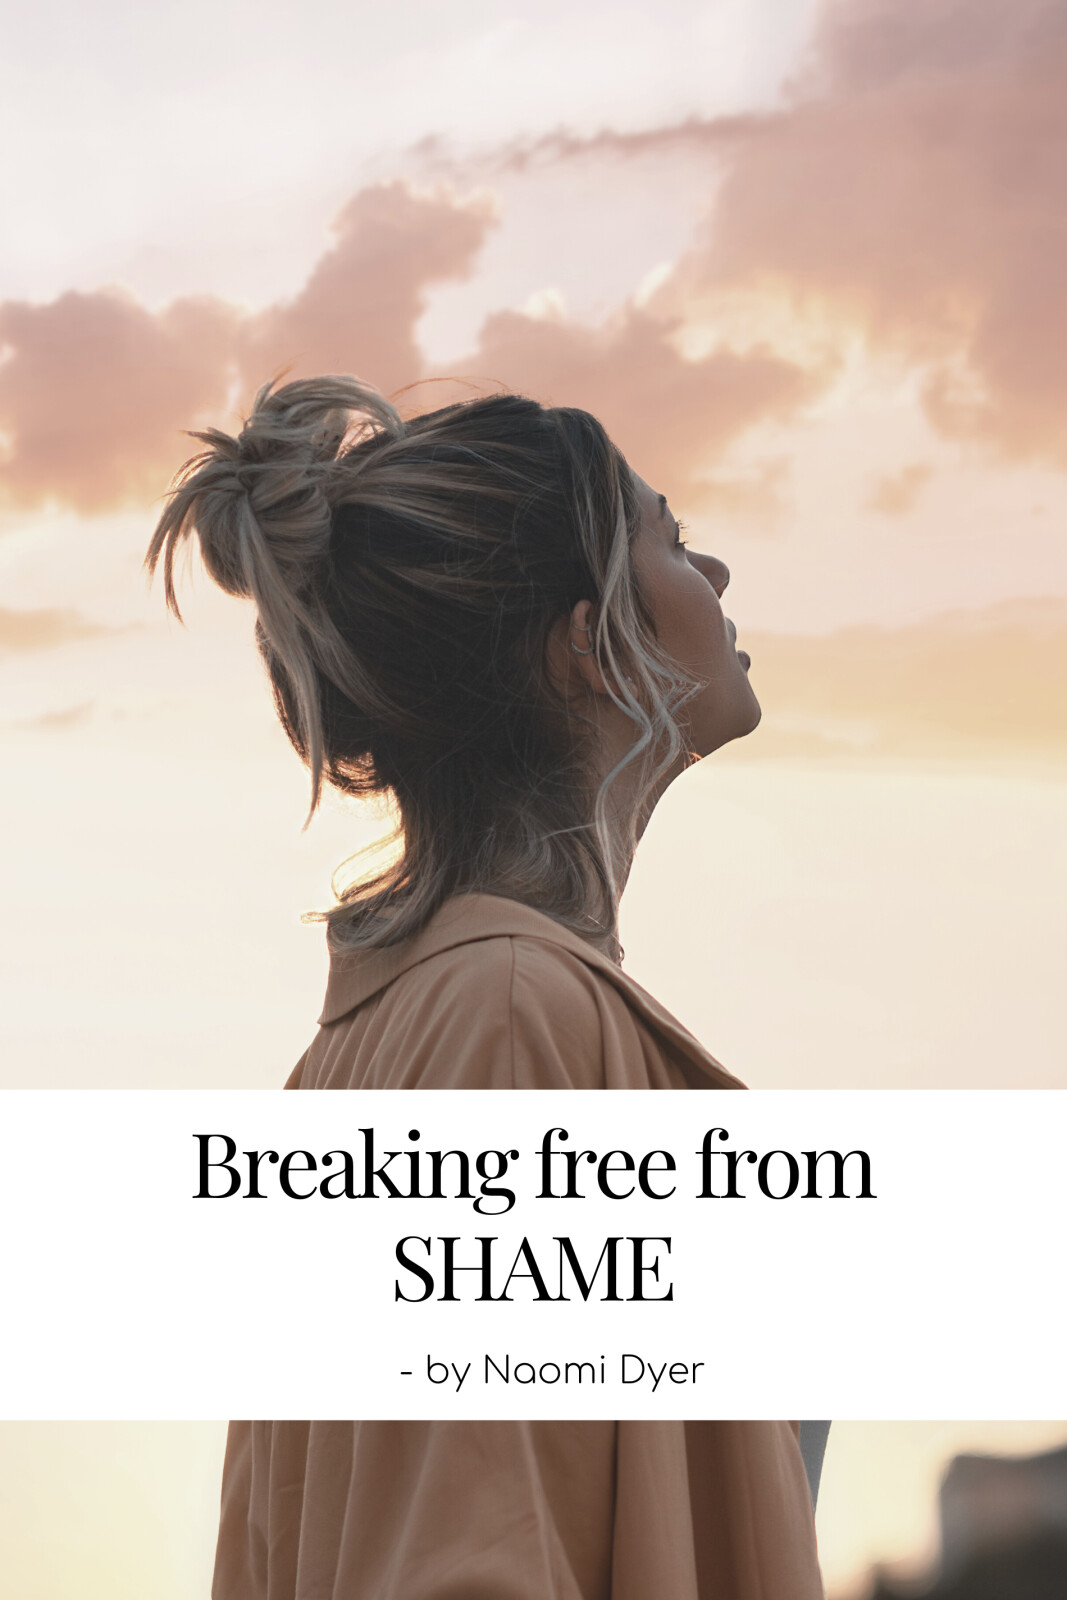 Breaking free from SHAME